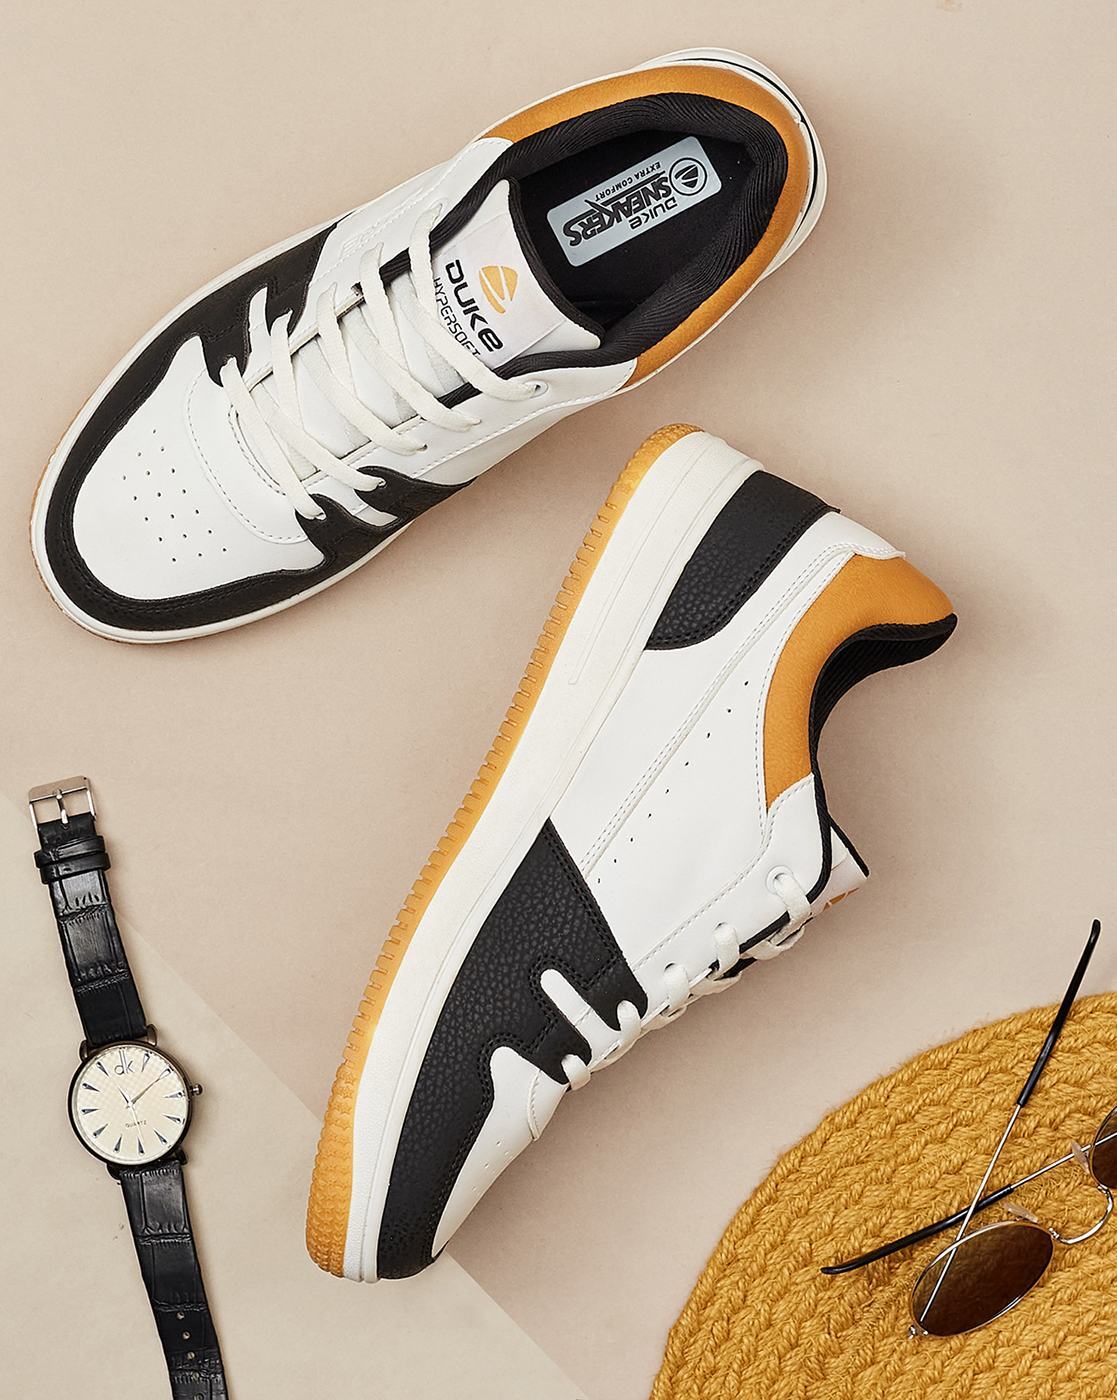 Buy Duke Shoes Online and Get Upto 70% Off at Myntra